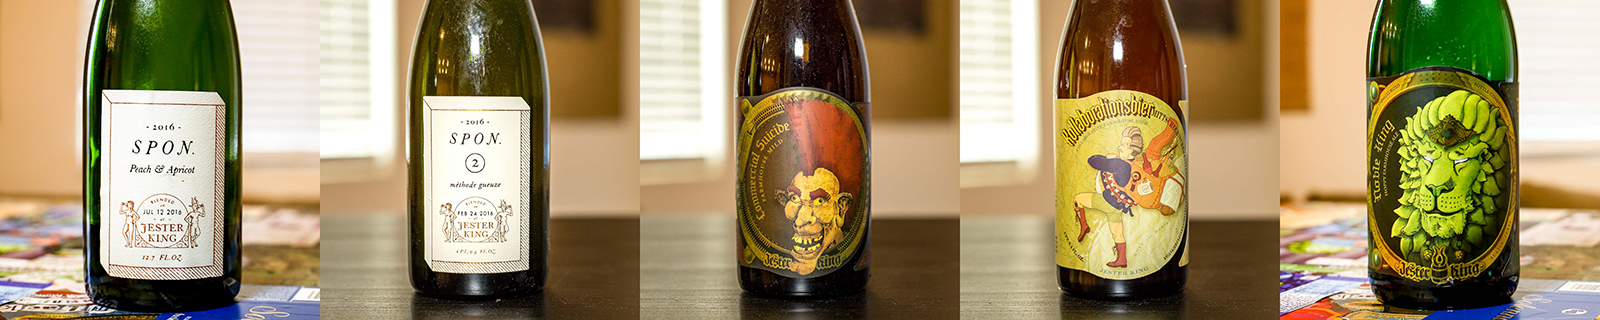 Jester King Brewery Beers